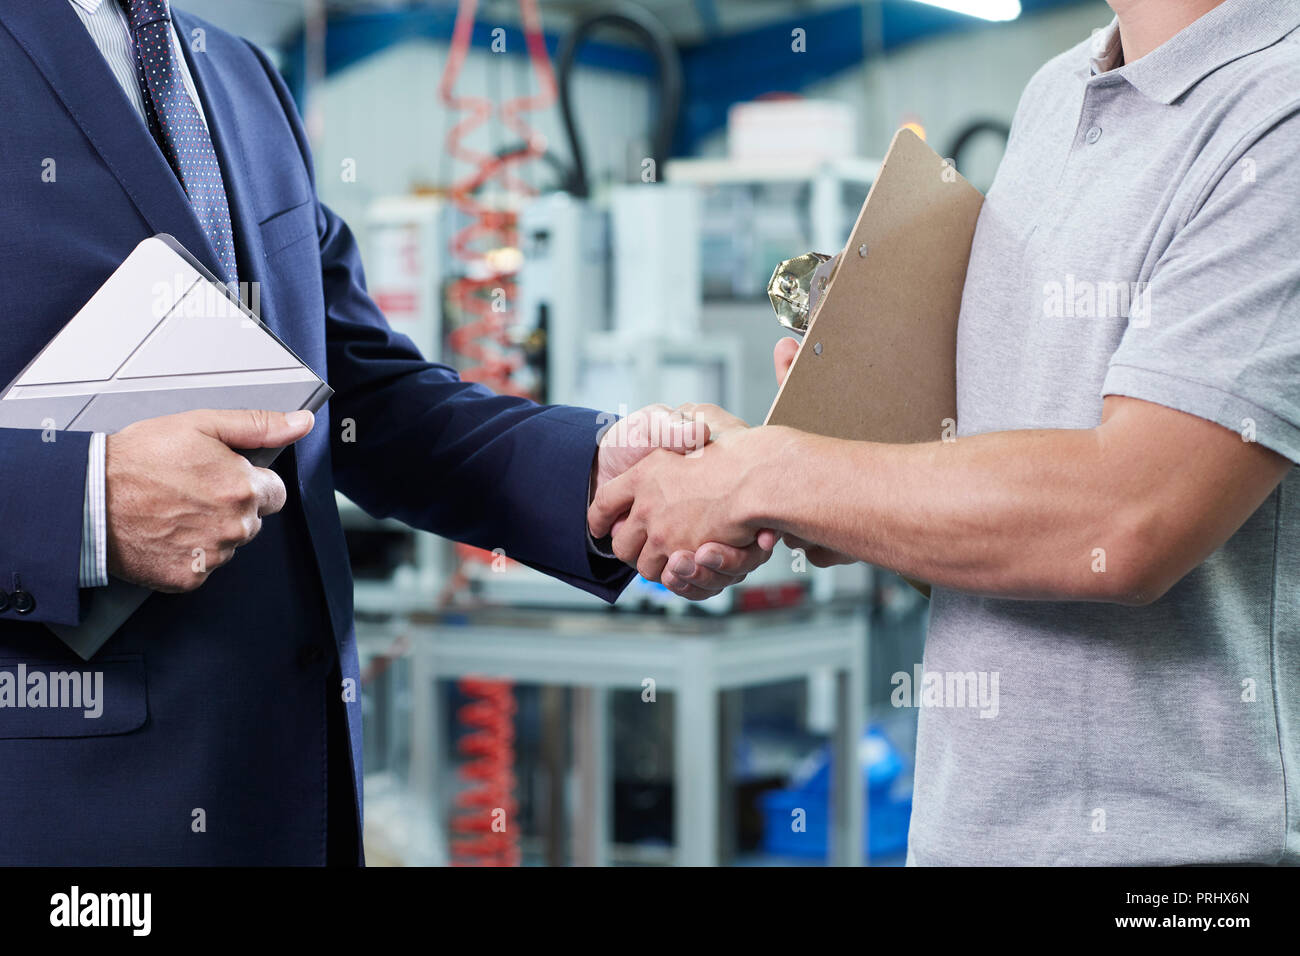 Close Up Of Business Owner With Digital Tablet In Factory Shaking Hands With Engineer Stock Photo